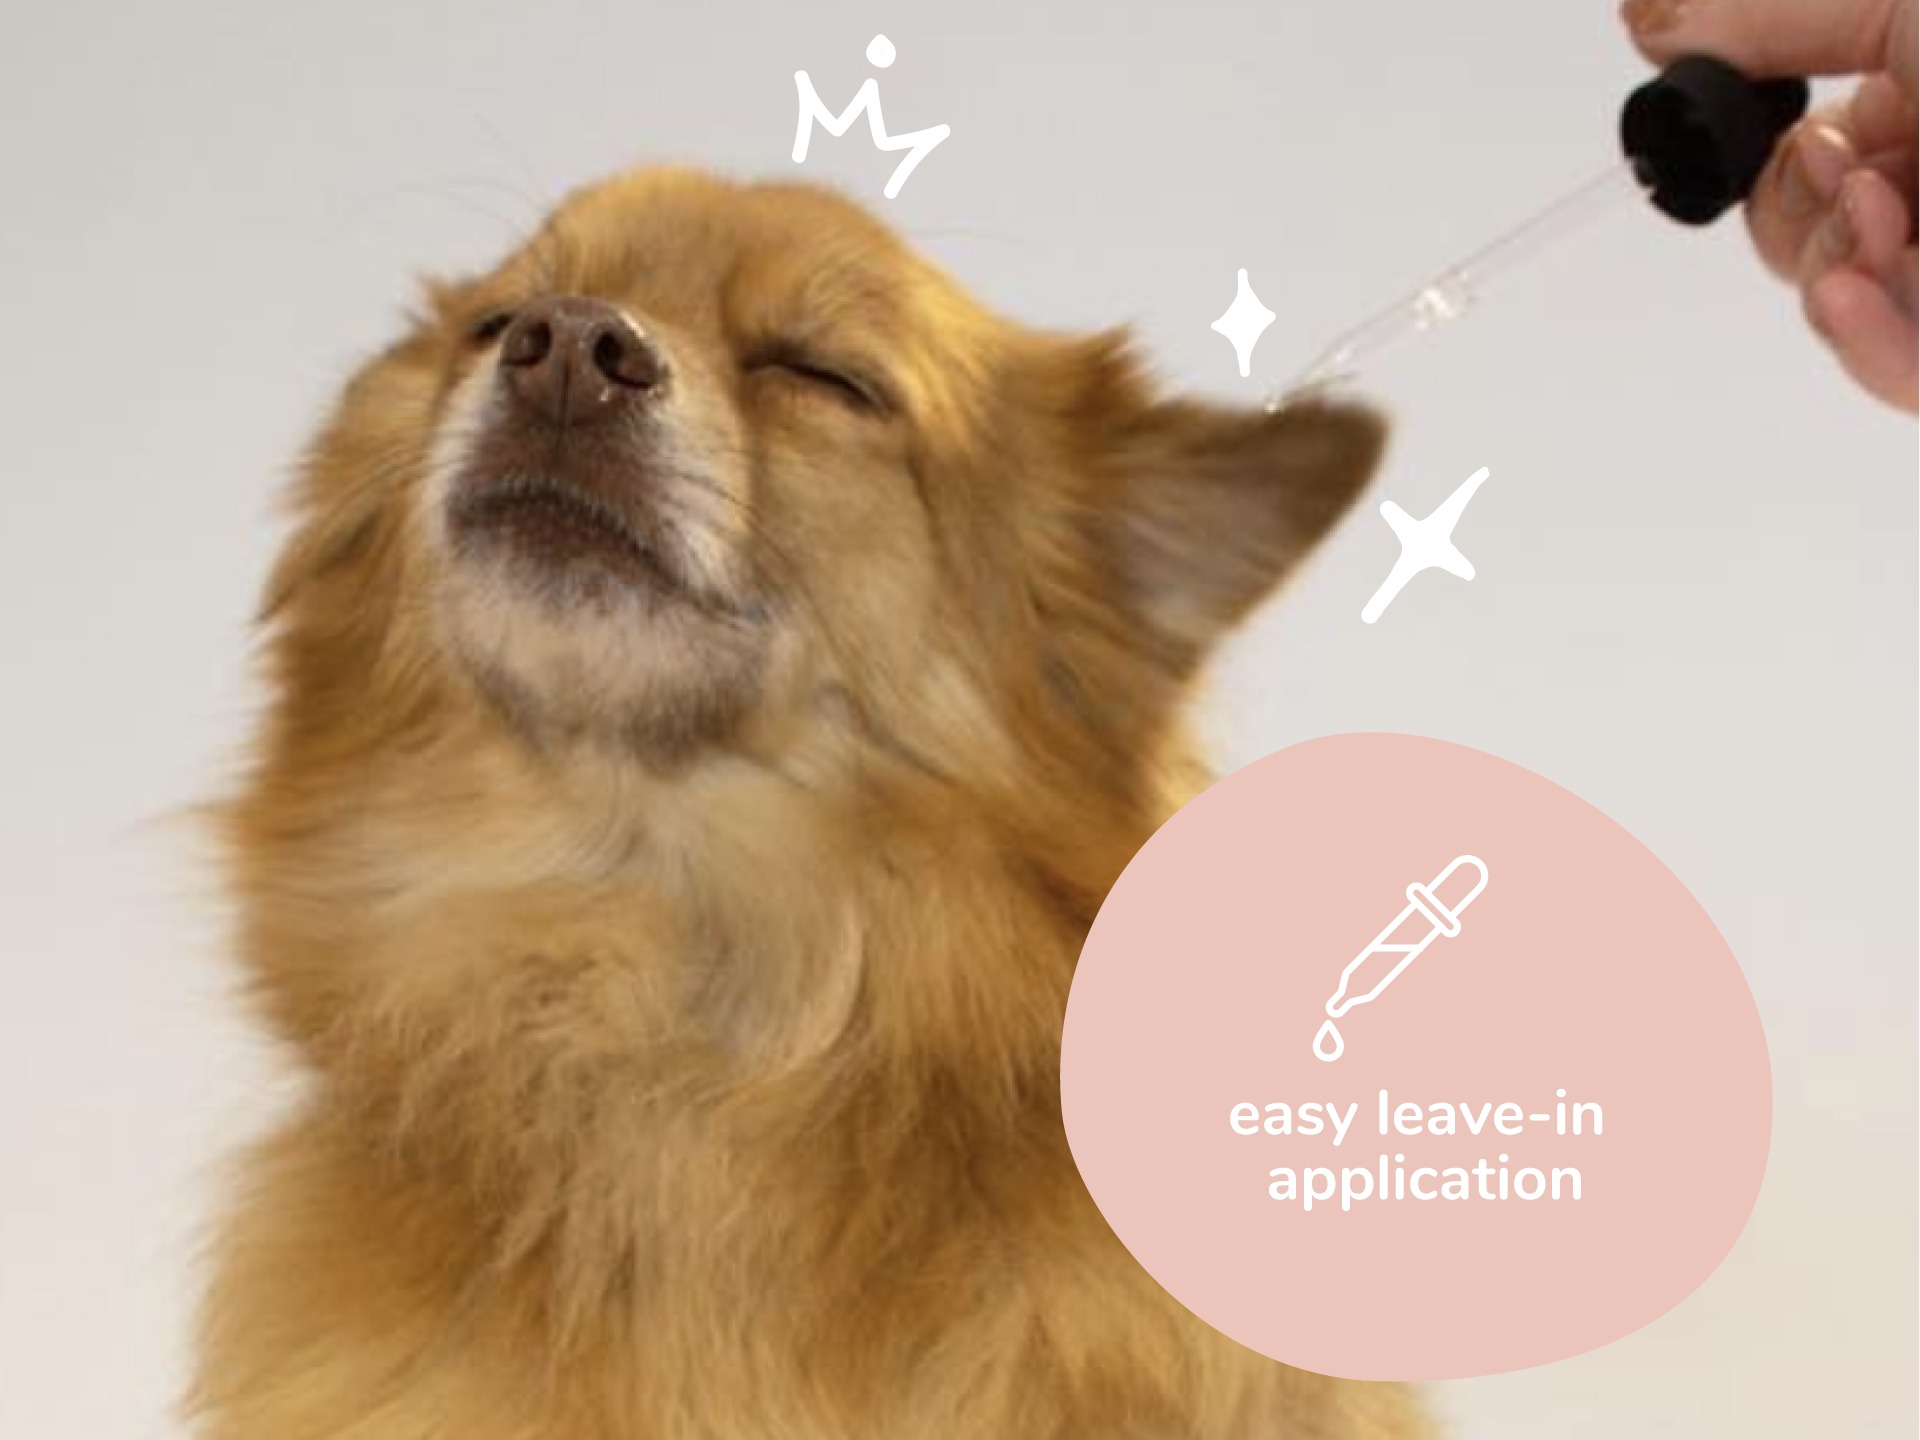 Image of chihuahua getting ear drops put in ear